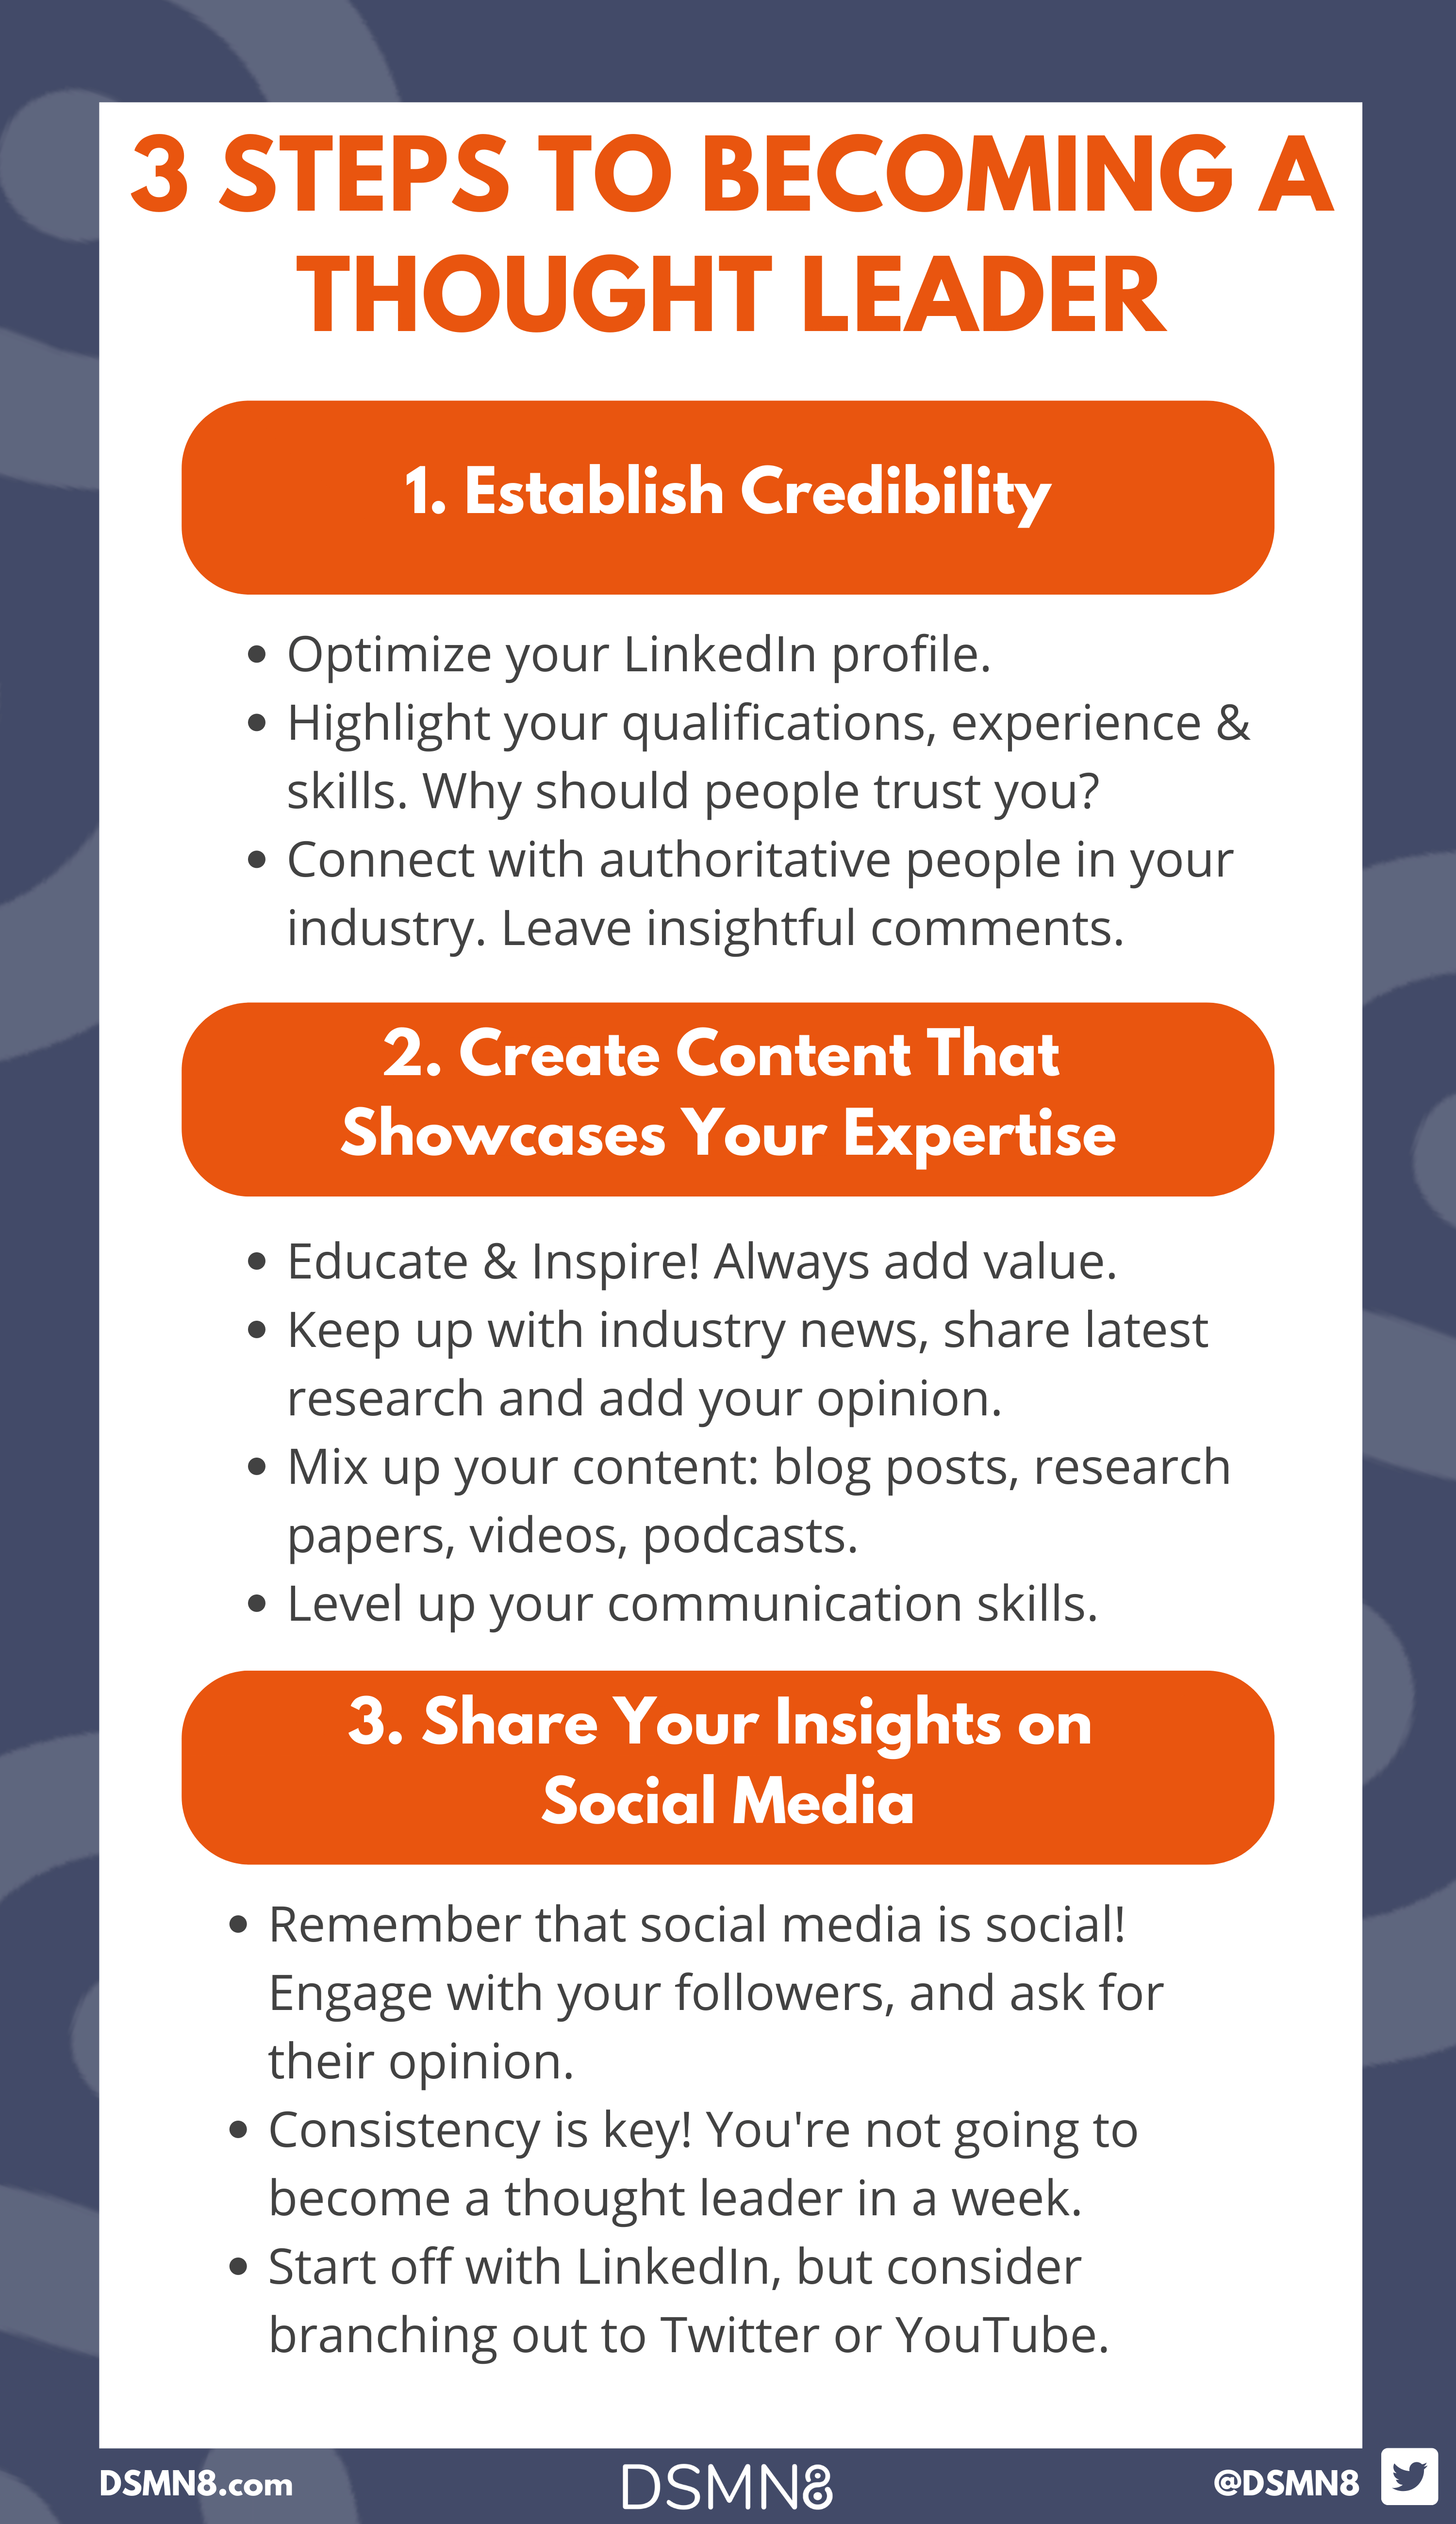 3 Steps To Becoming a Thought Leader Infographic